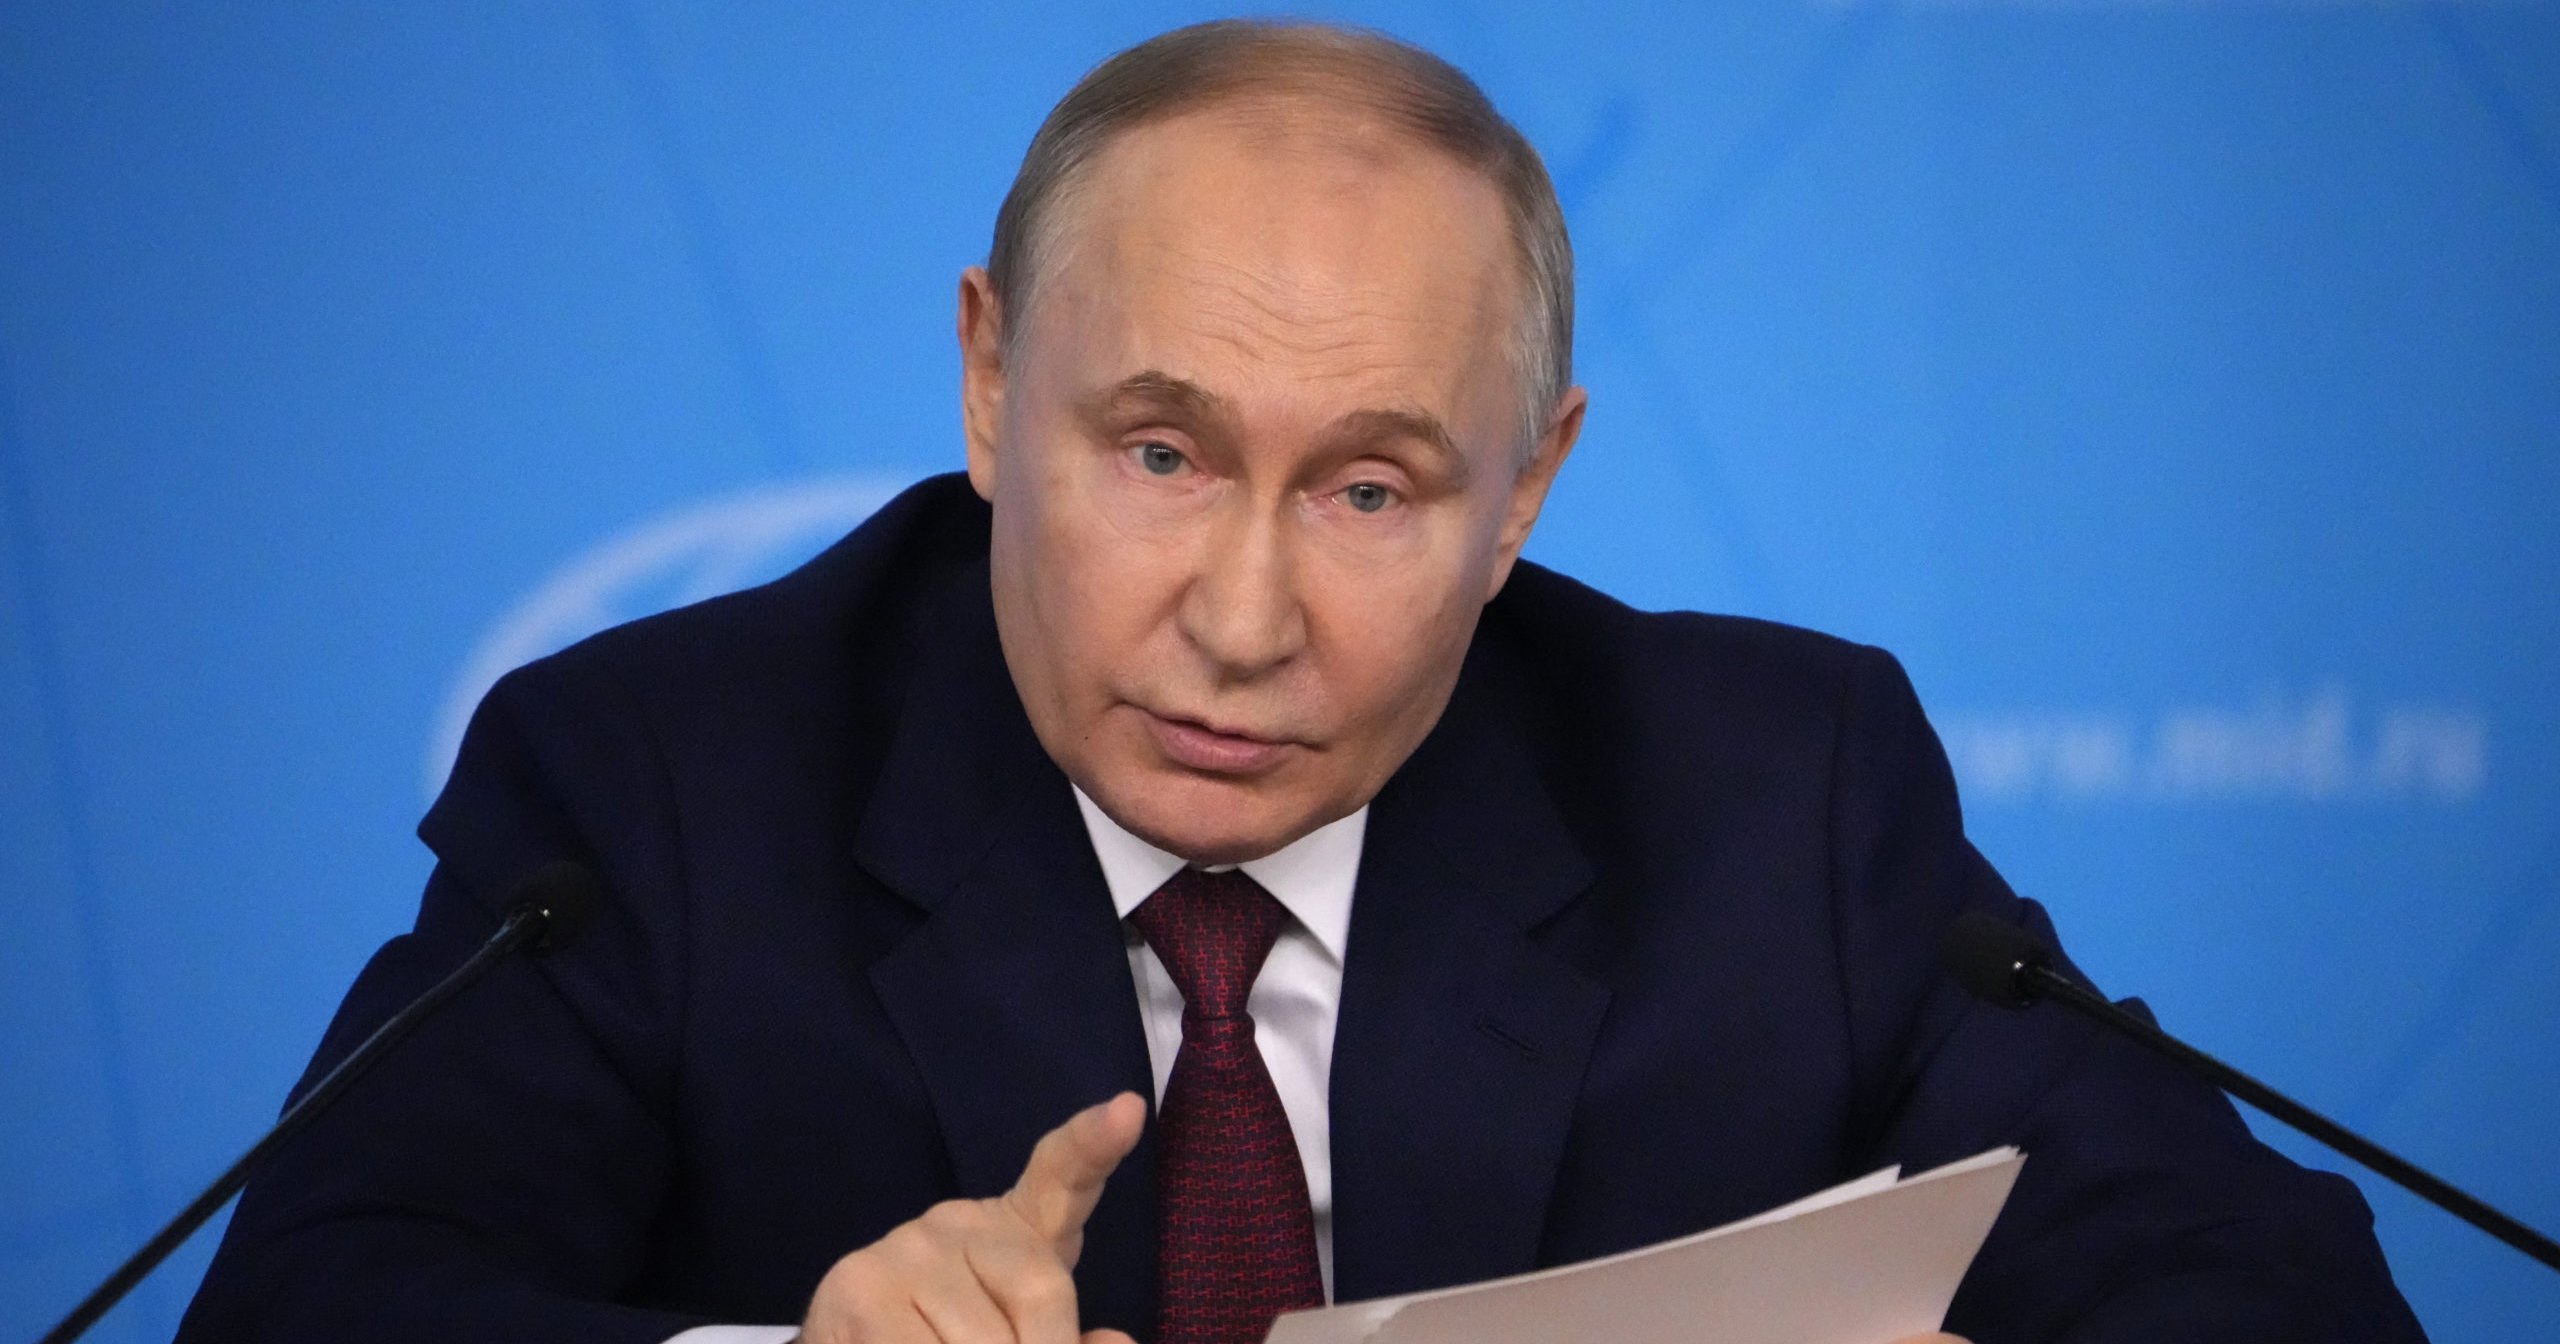 Putin Proposes Immediate Ceasefire with Conditions; Ukraine and U.S. Dismiss Offer